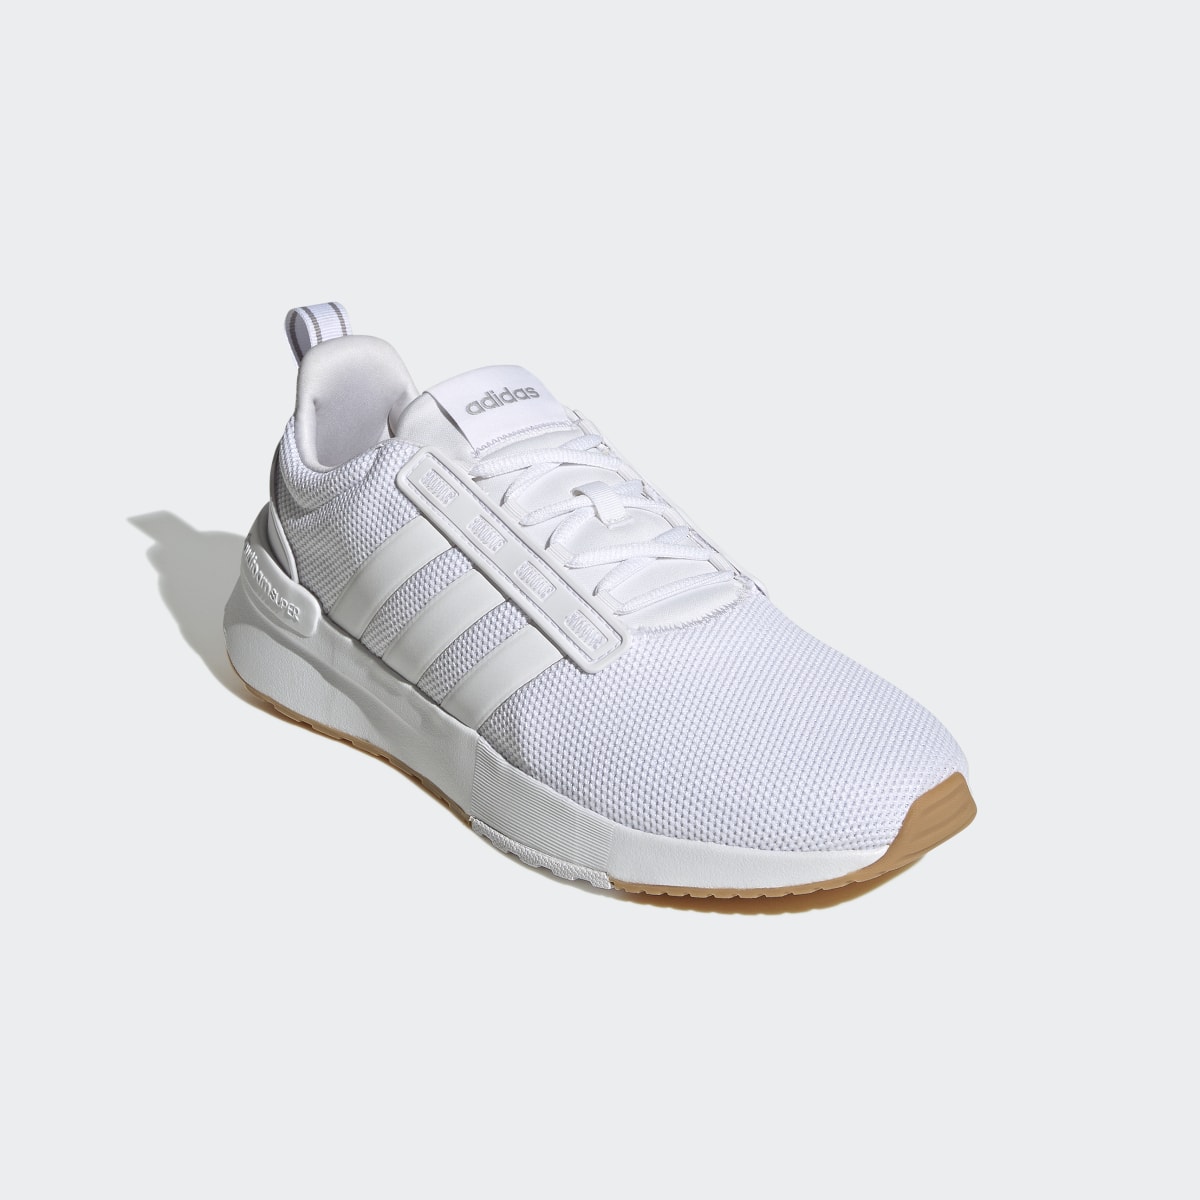 Adidas Chaussure Racer TR21. 5